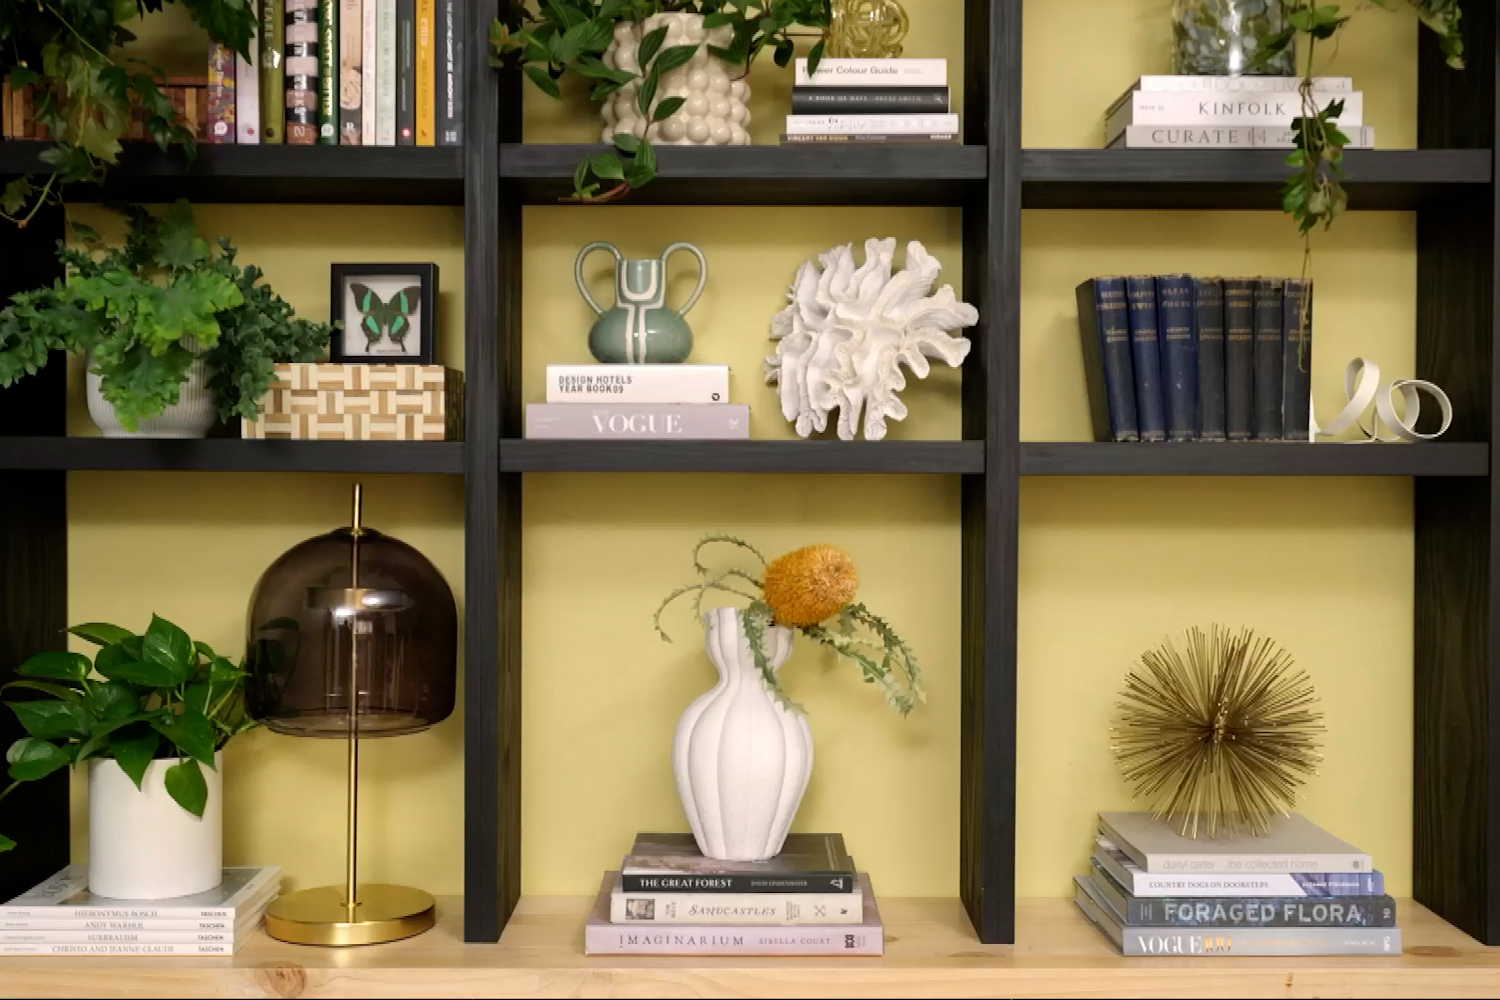 How To Turn Your Living Room Into A Living Library | Better Homes and ...